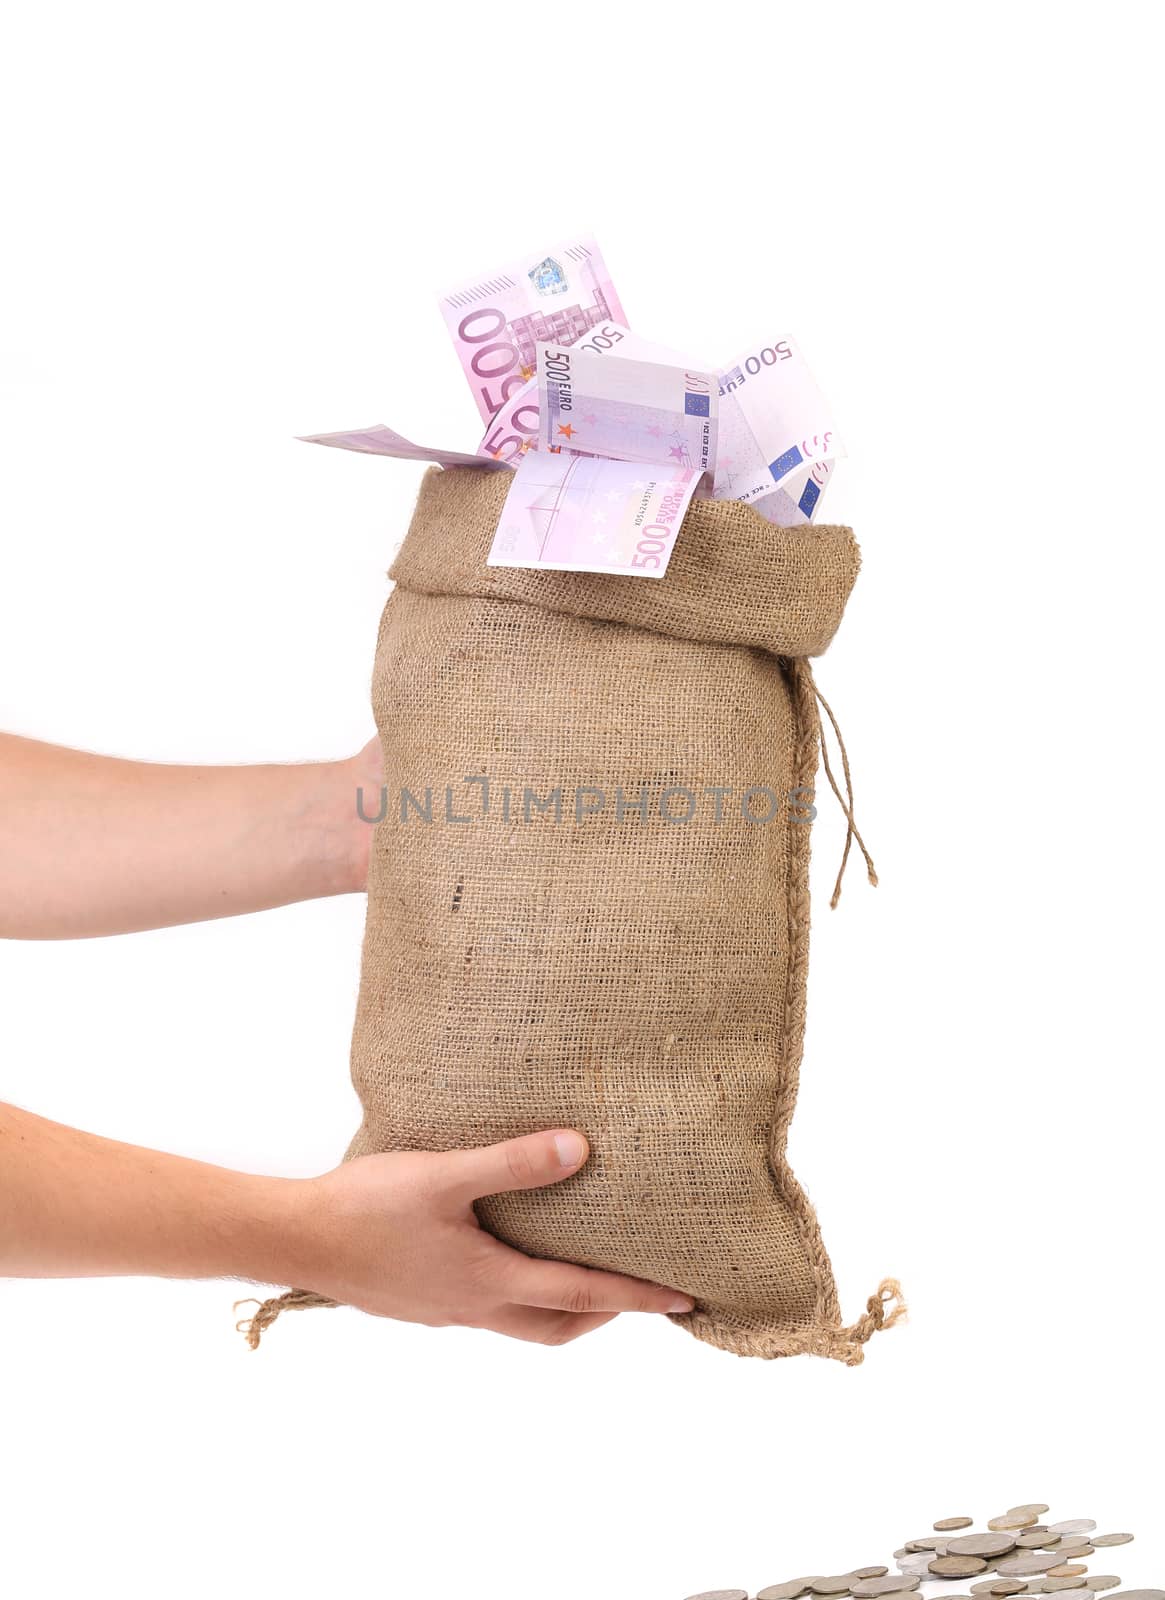 Sack with money. by indigolotos